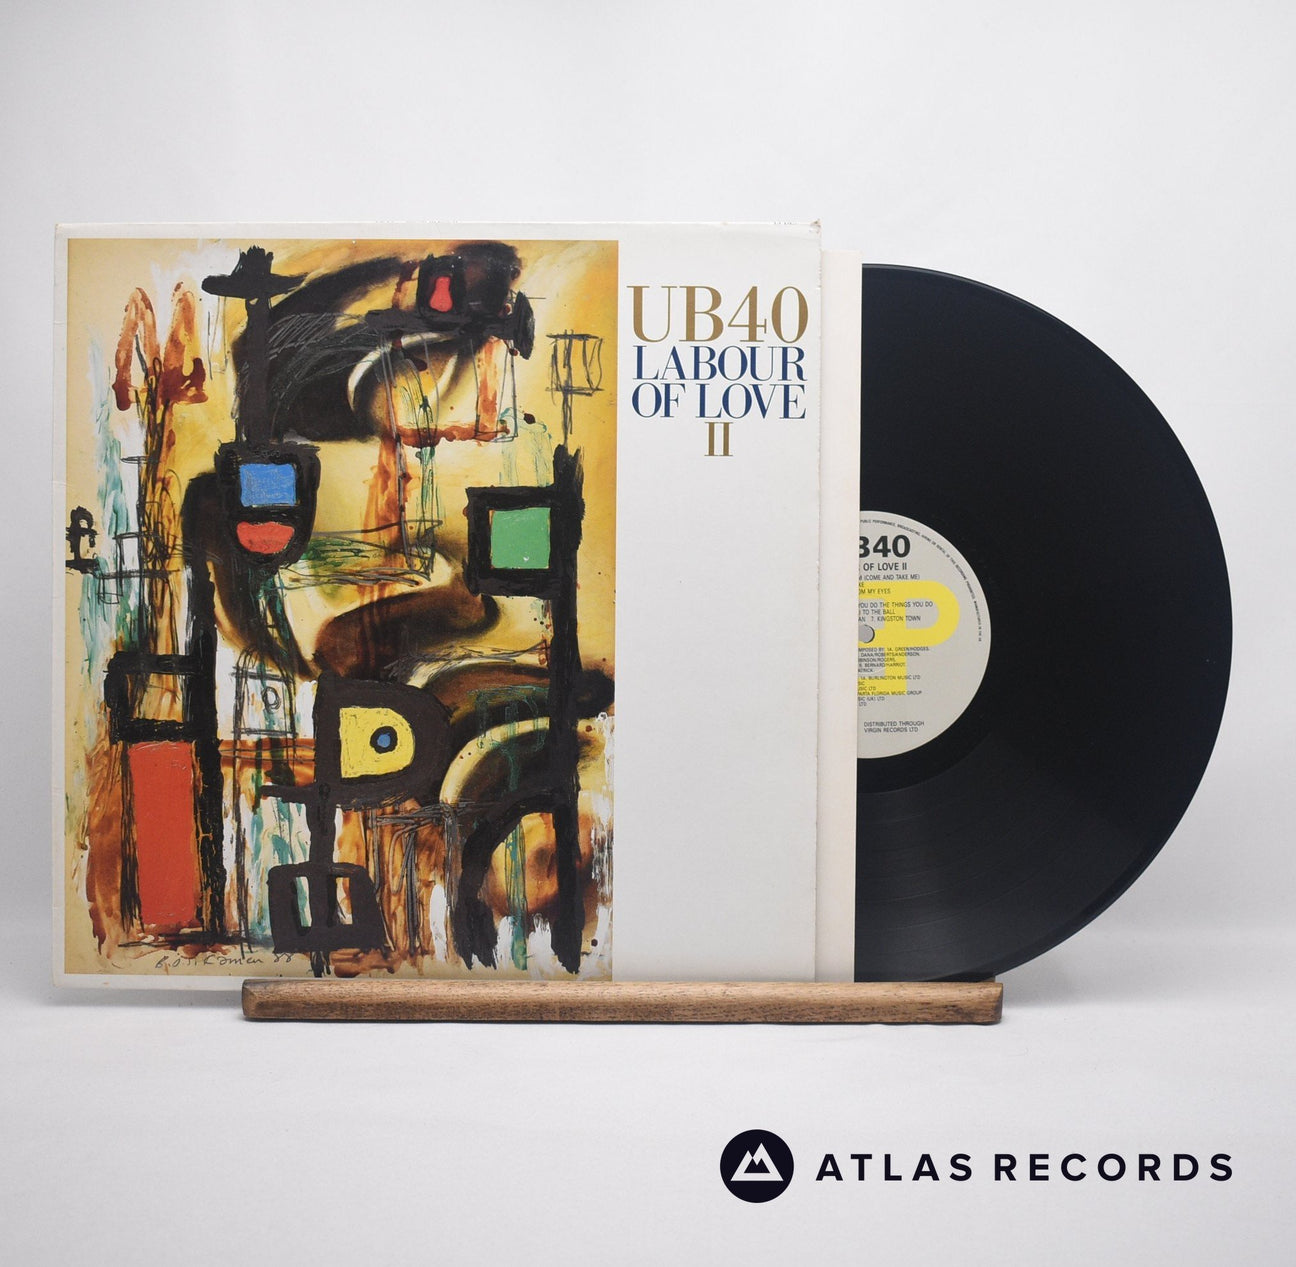 UB40 Labour Of Love II LP Vinyl Record - Front Cover & Record